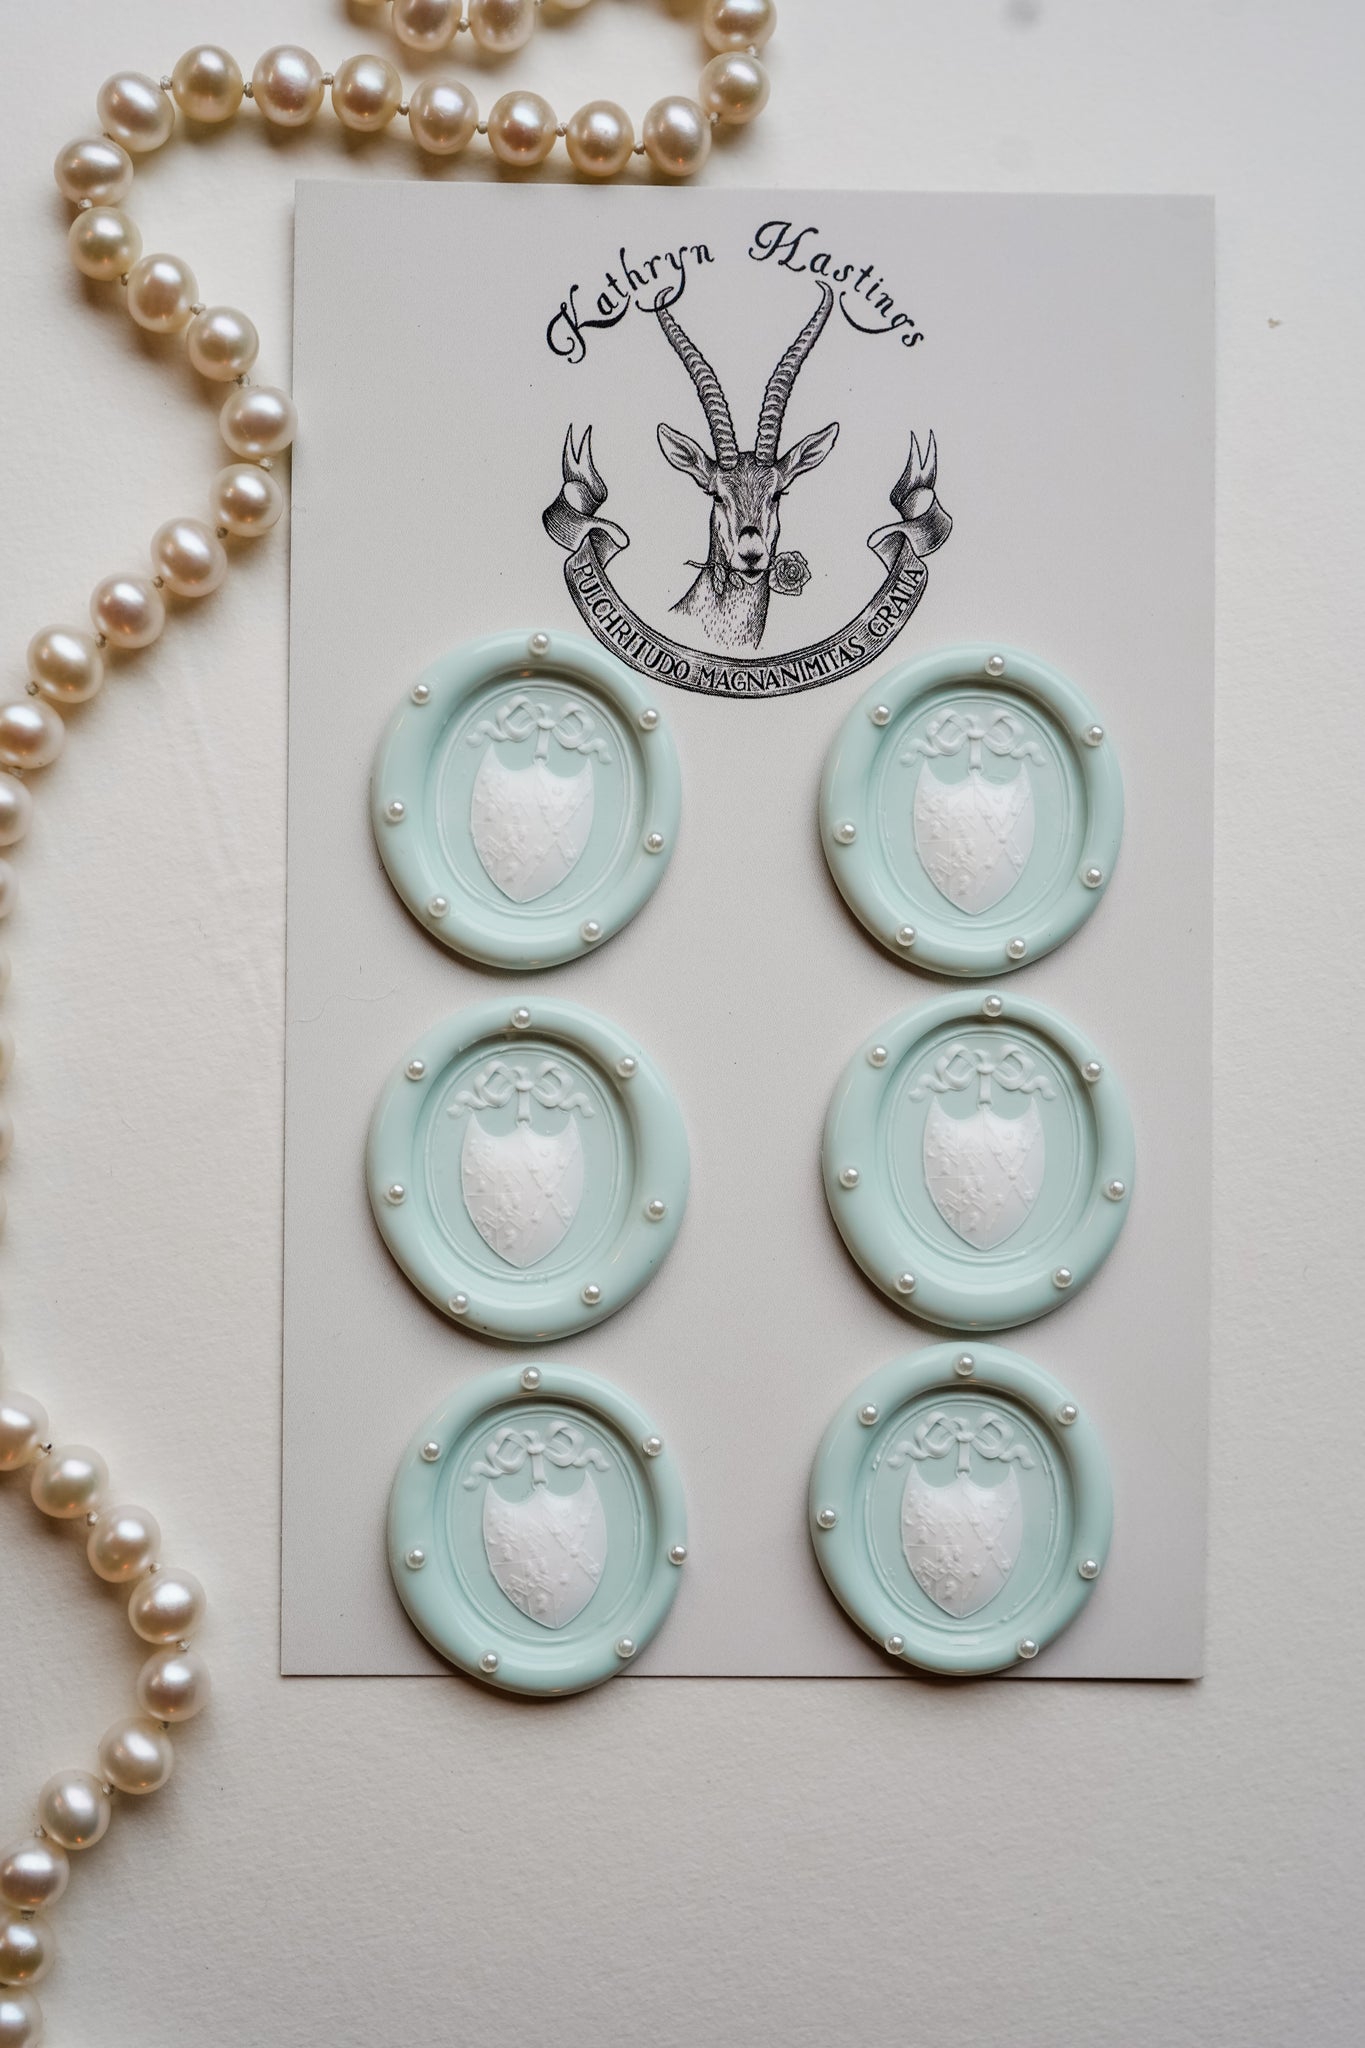 Two-Toned Pearl Heraldic Bow Seals